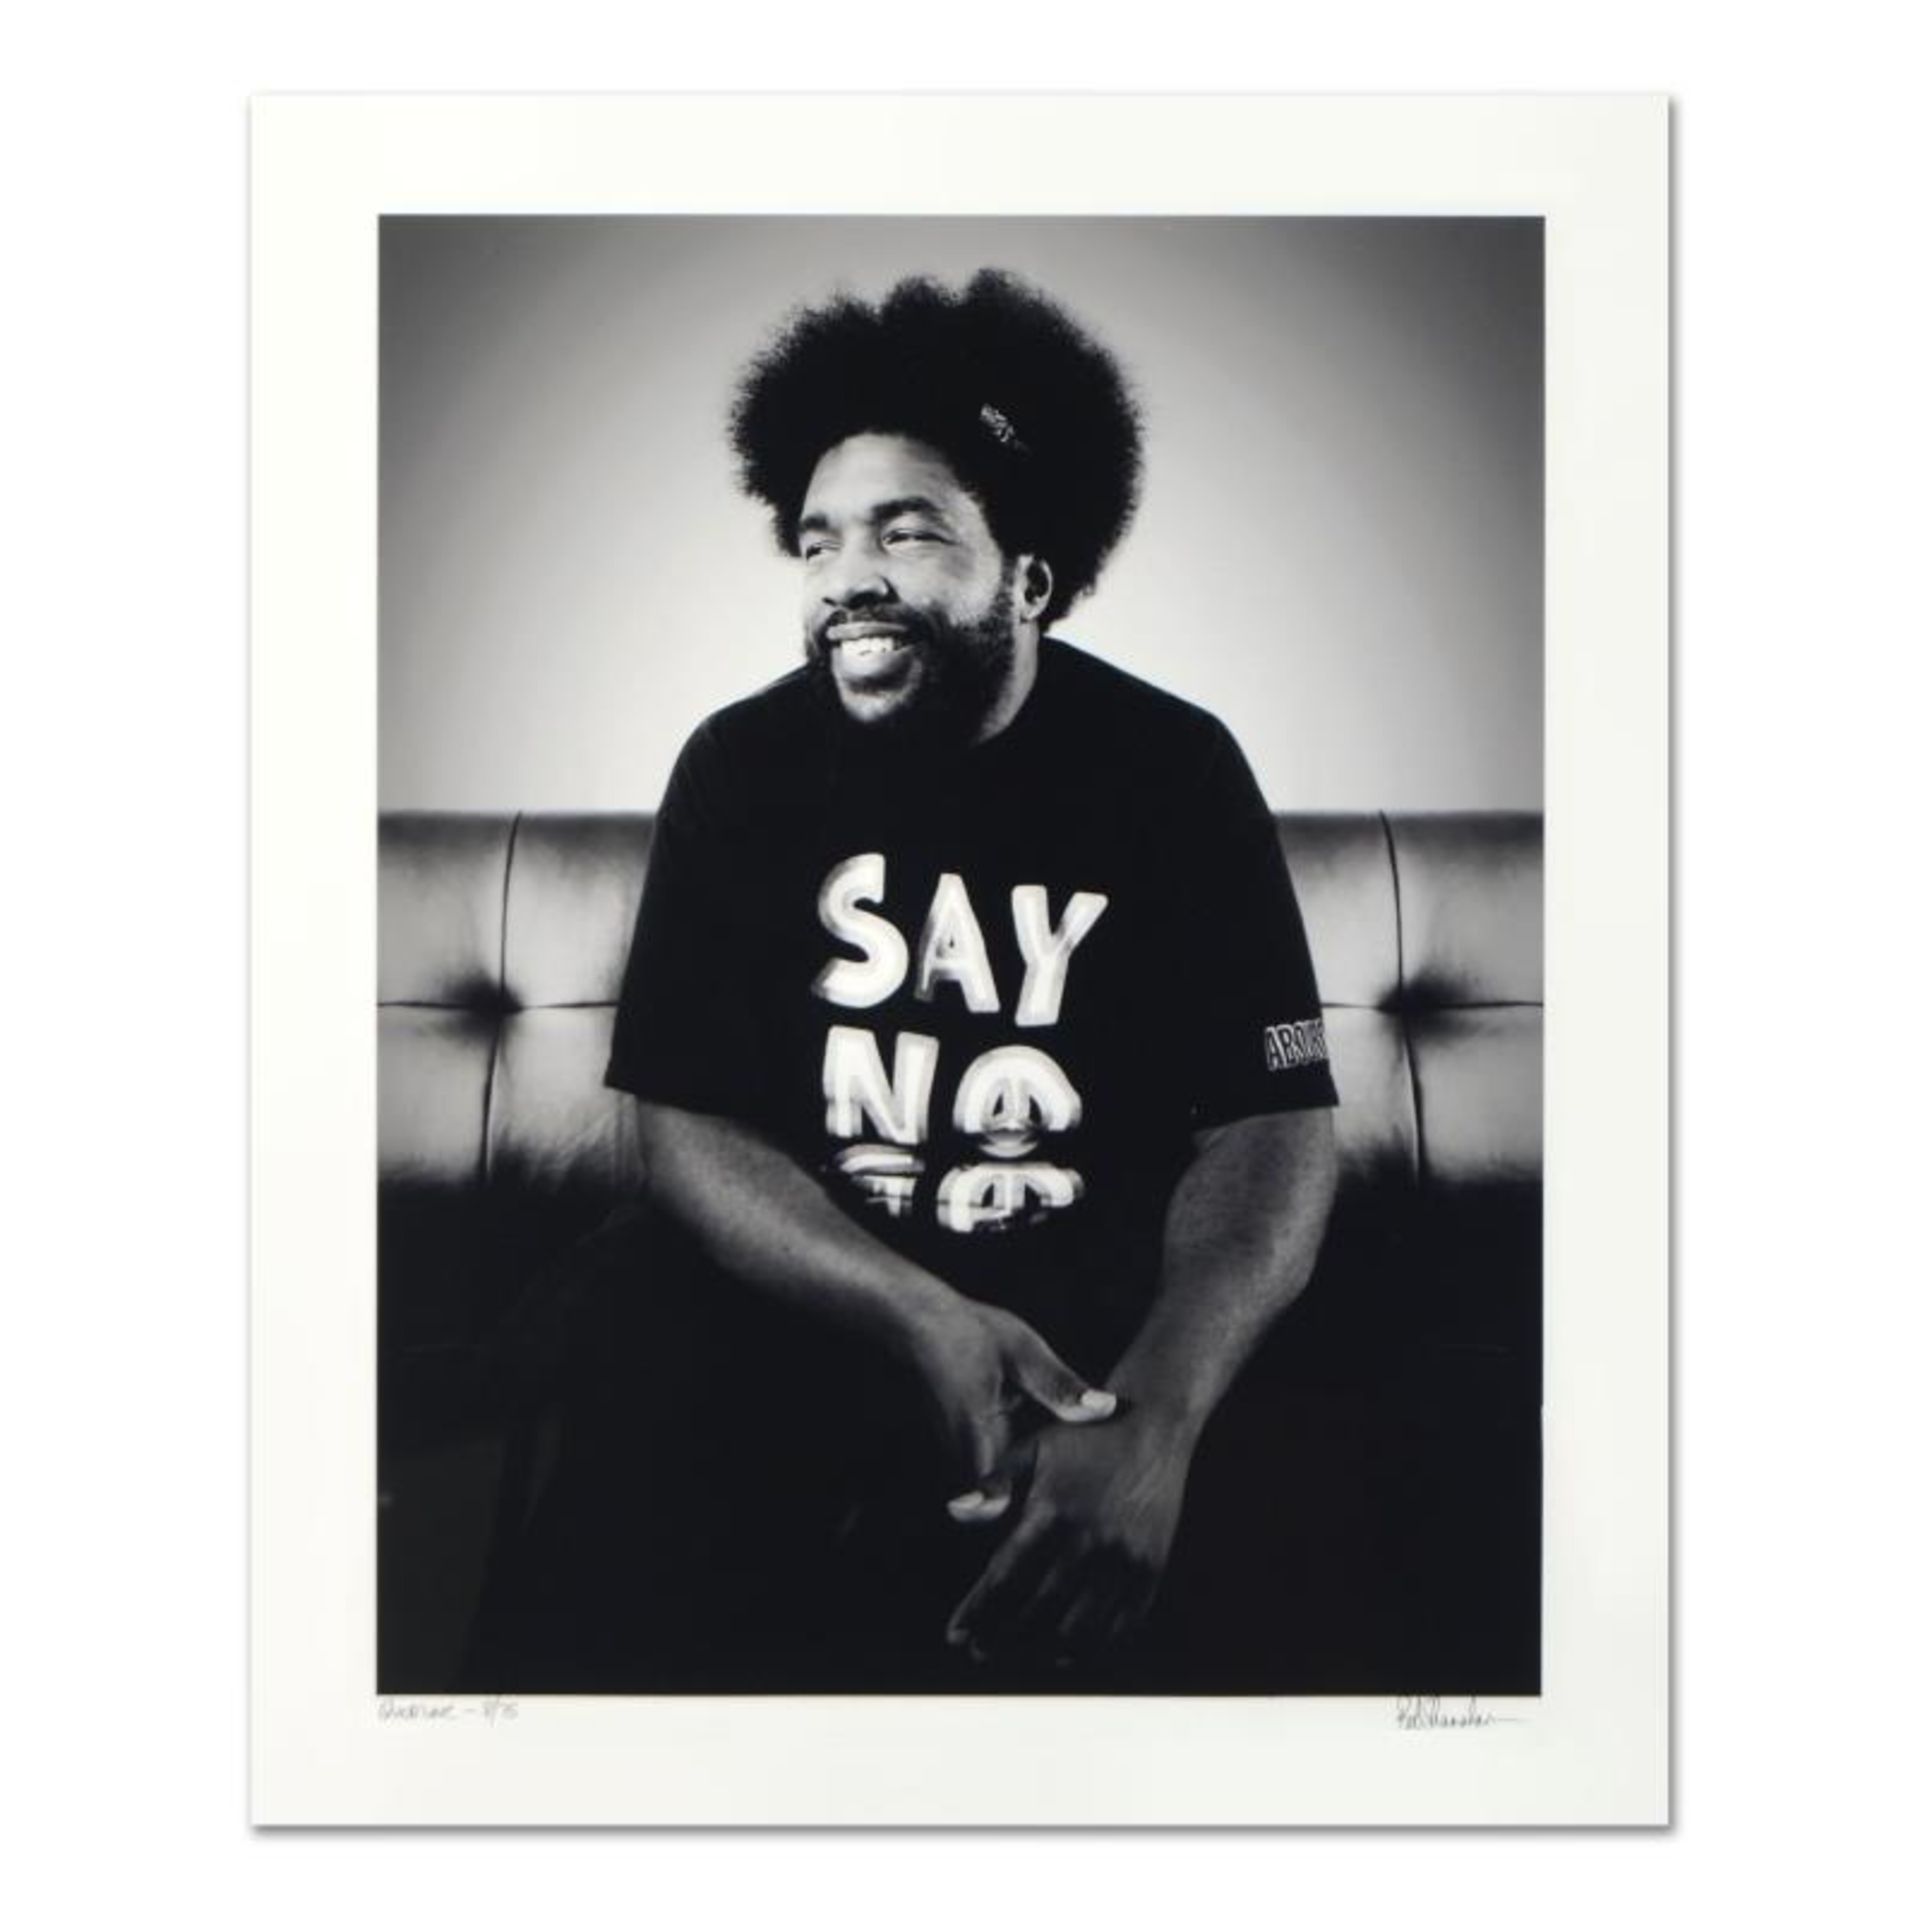 Questlove by Shanahan, Rob - Image 2 of 4